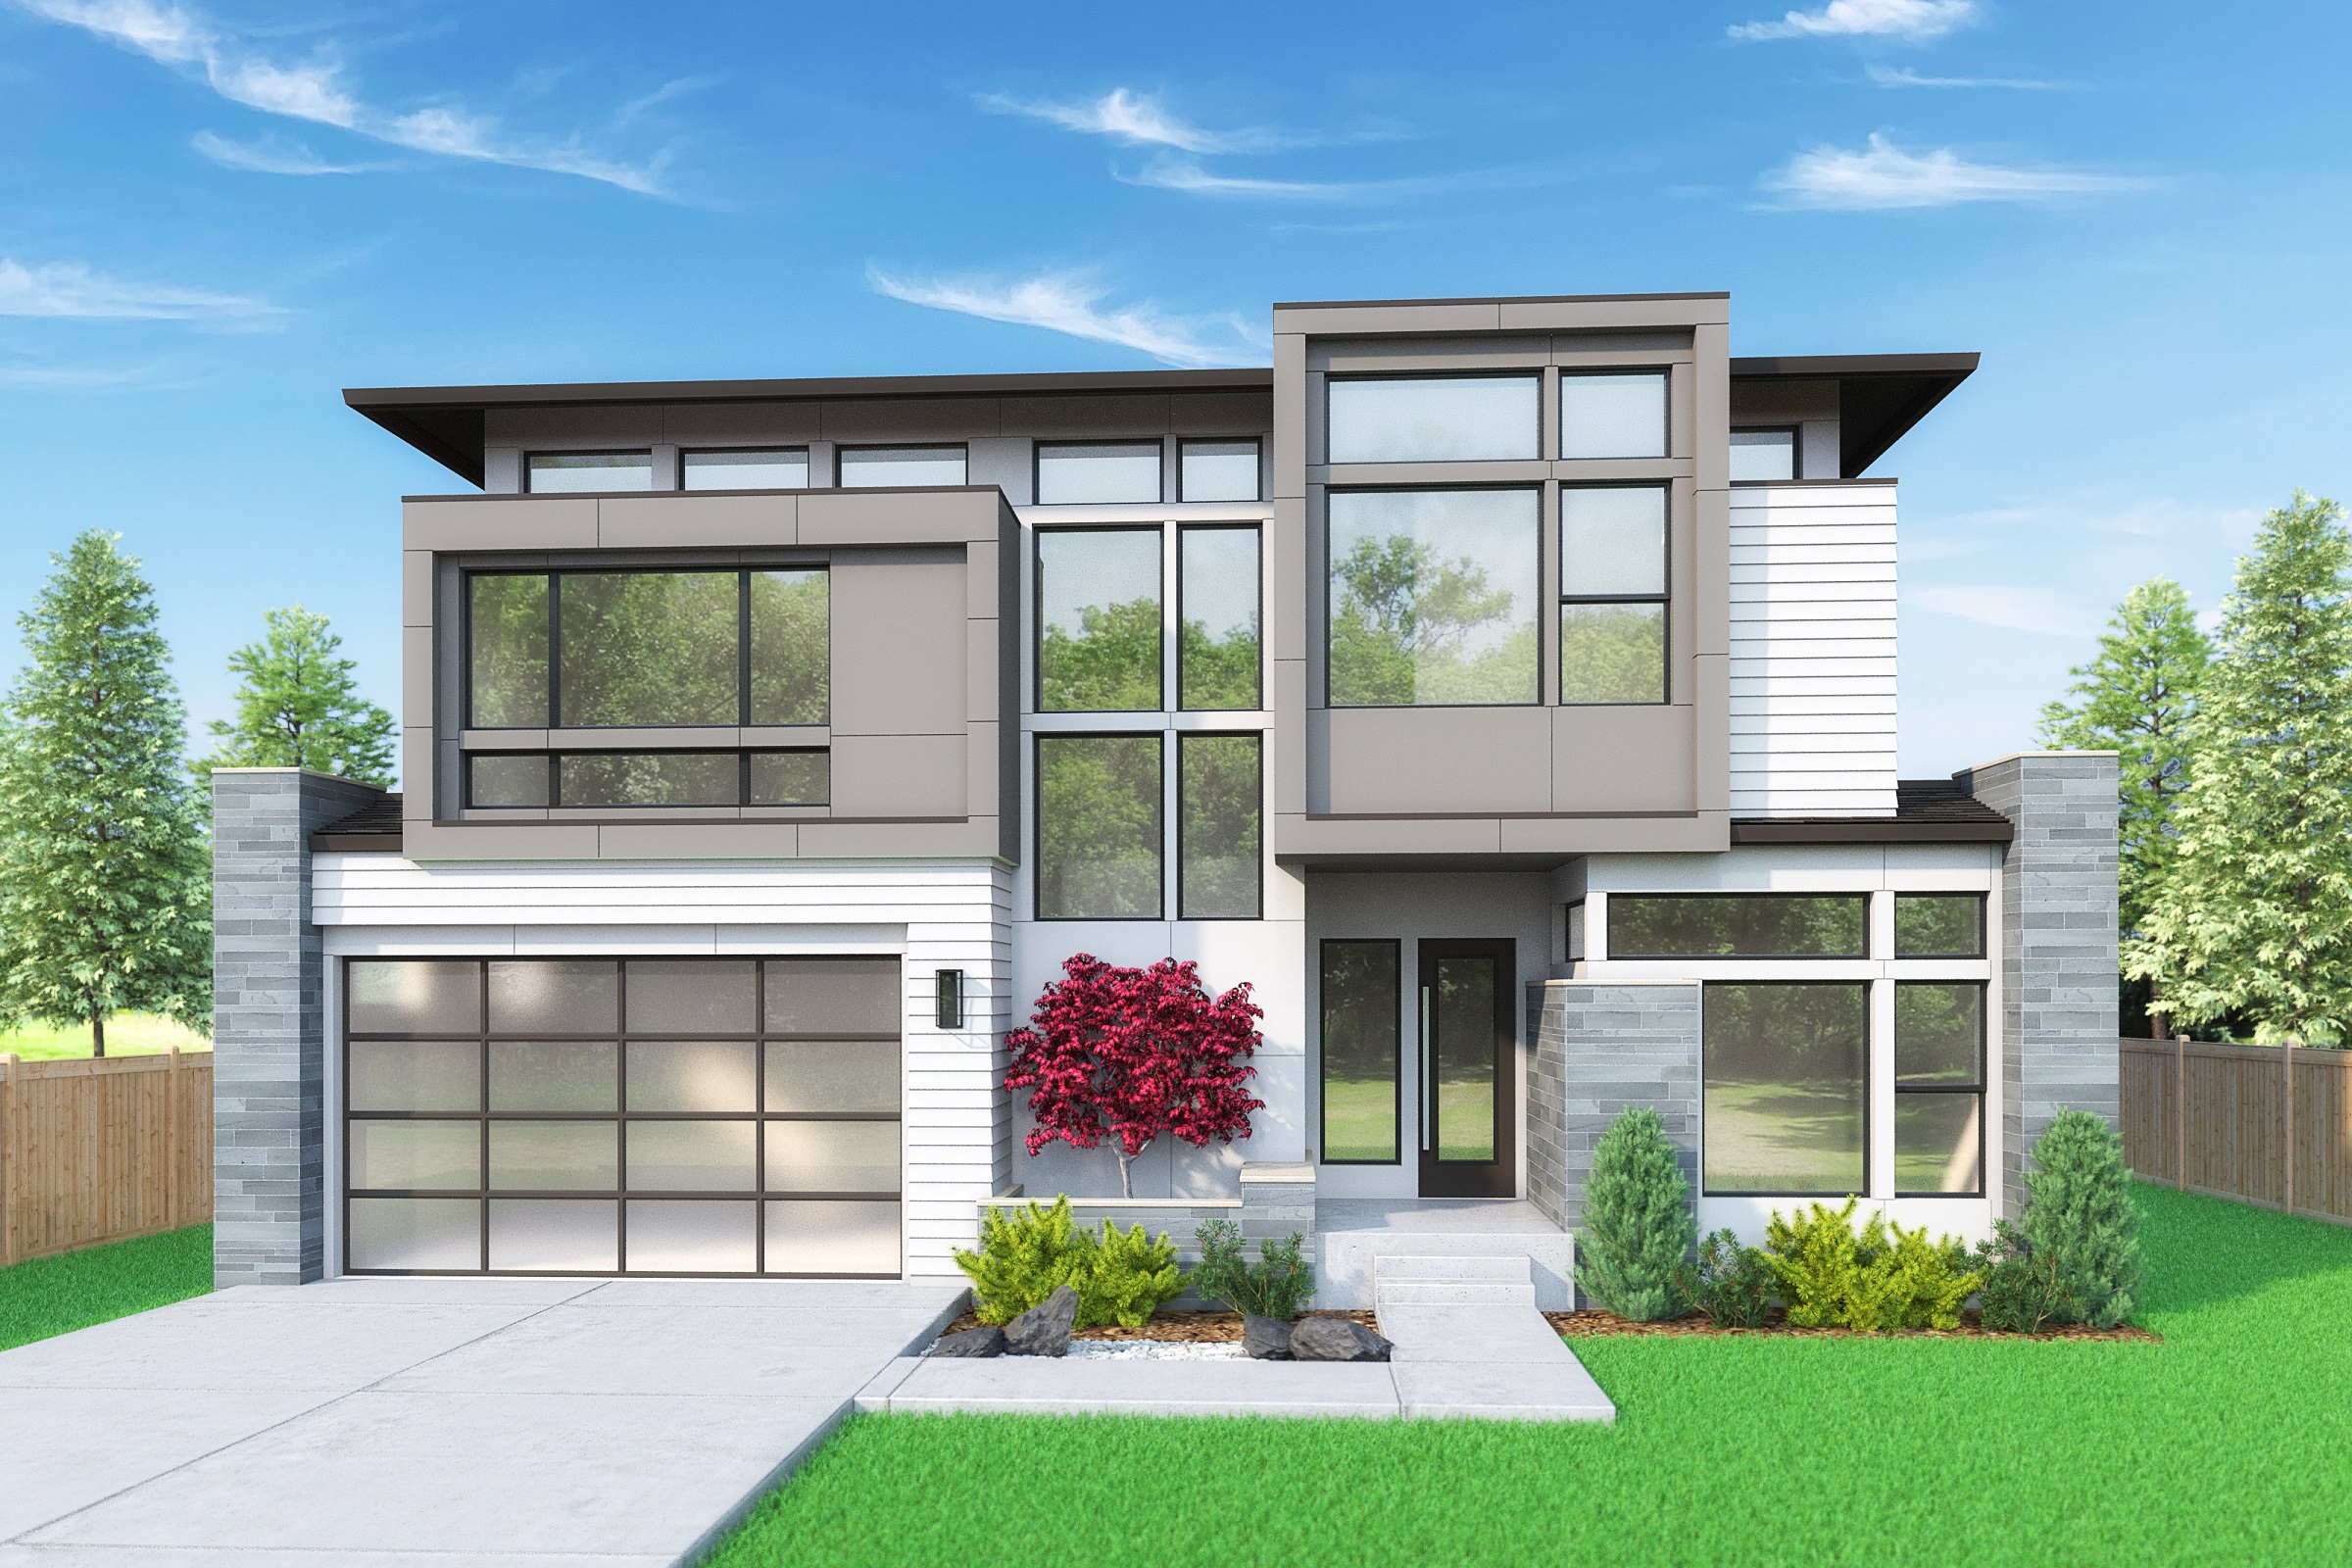 View our new luxury home construction on 648 165th Ave NE, in Bellevue, WA from MN Custom Homes